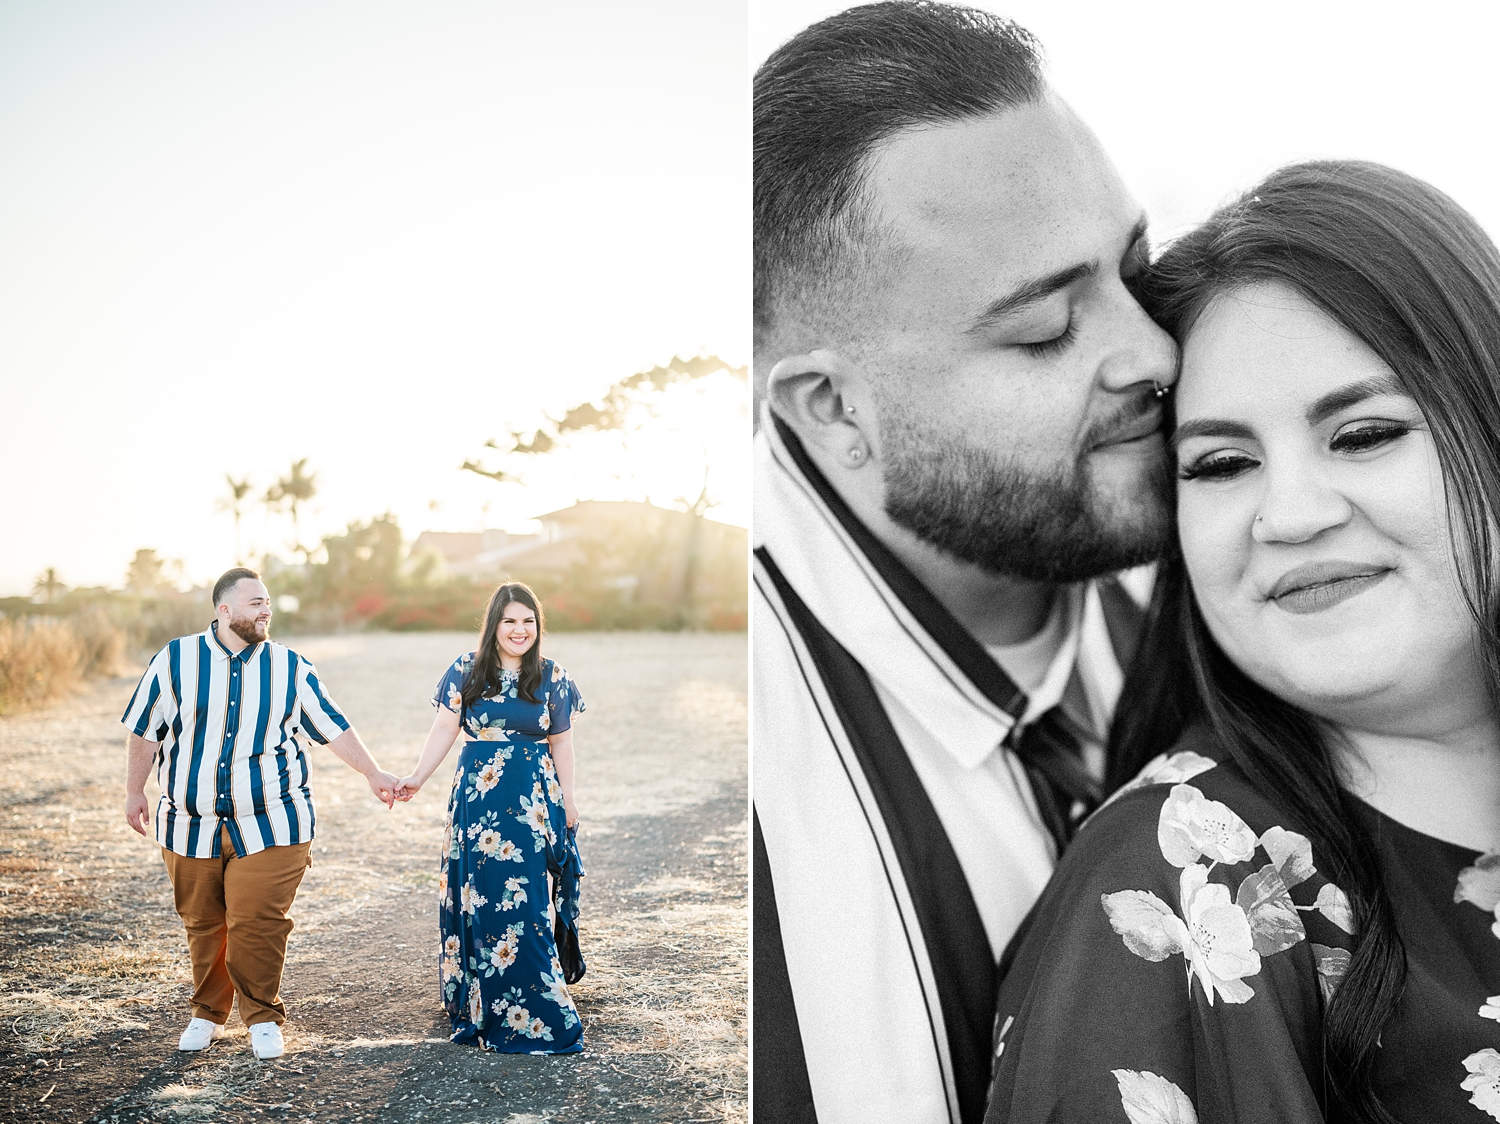 Beach Cliffs Engagement Session at Sunset | Nataly Hernandez Photography | Edwin and Susana-61.jpg